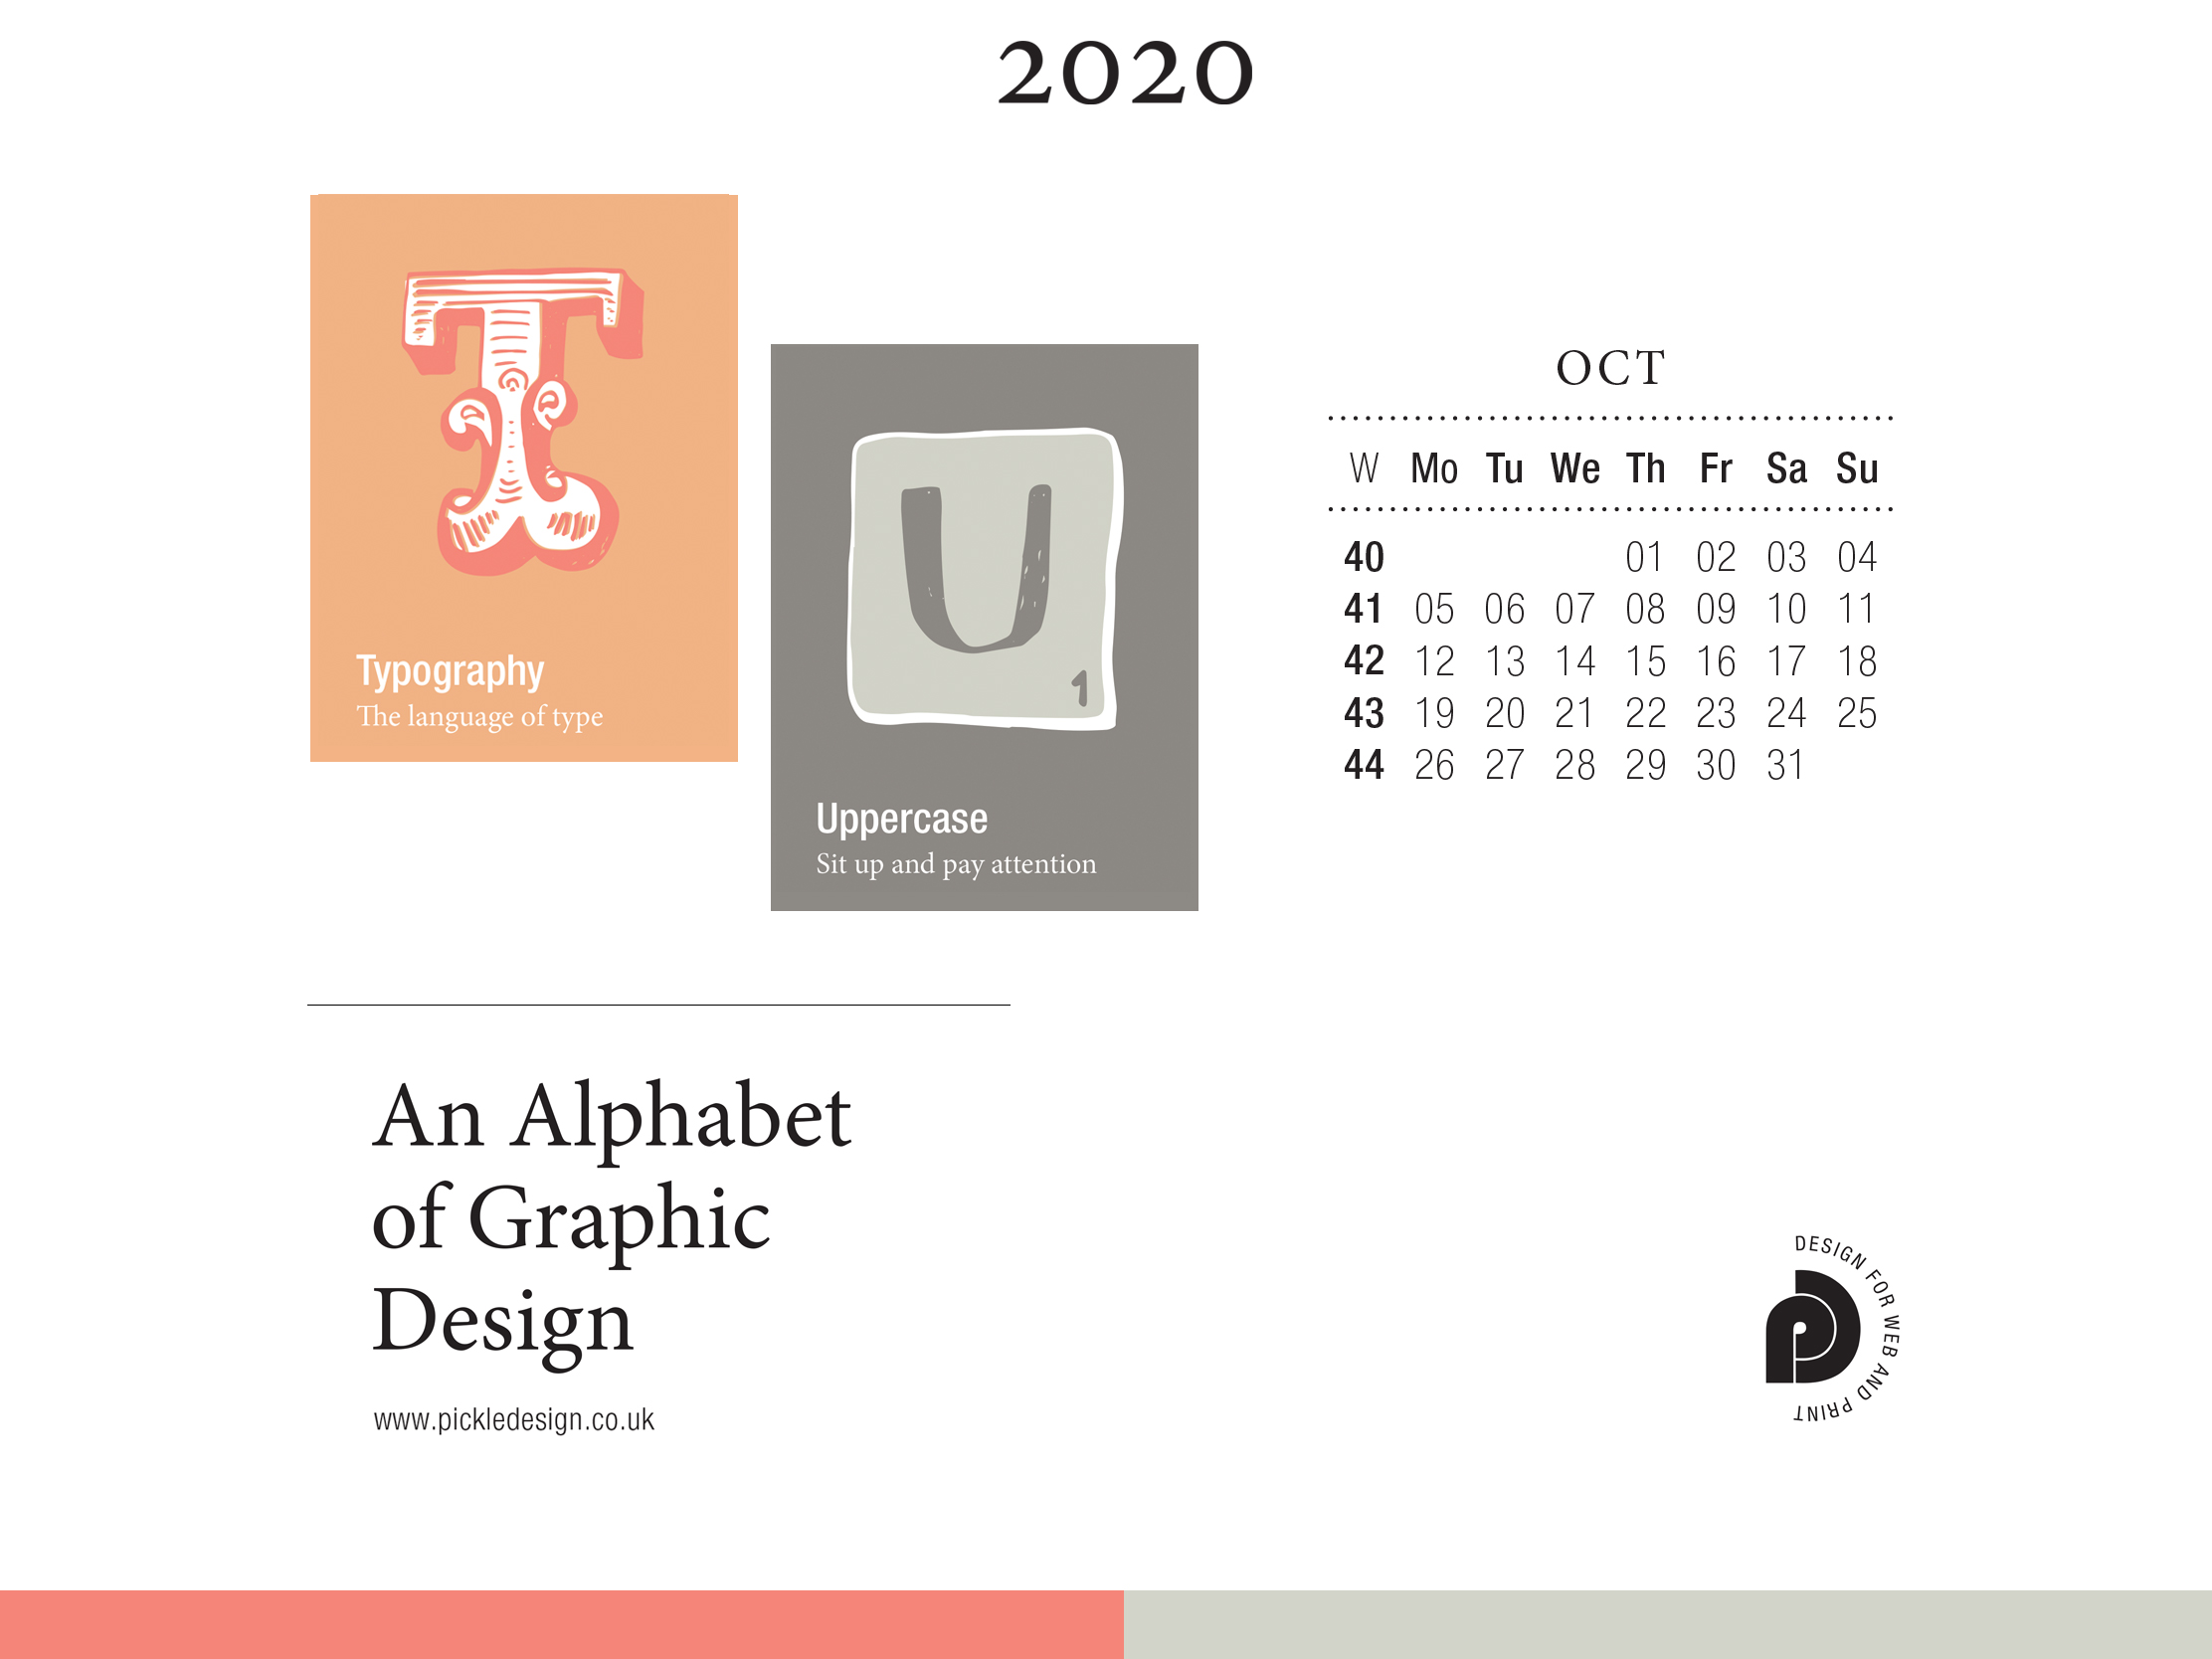 Download the month of October from our Alphabet of Graphic Design calendar for free for your mobile, tablet and desktop computer background